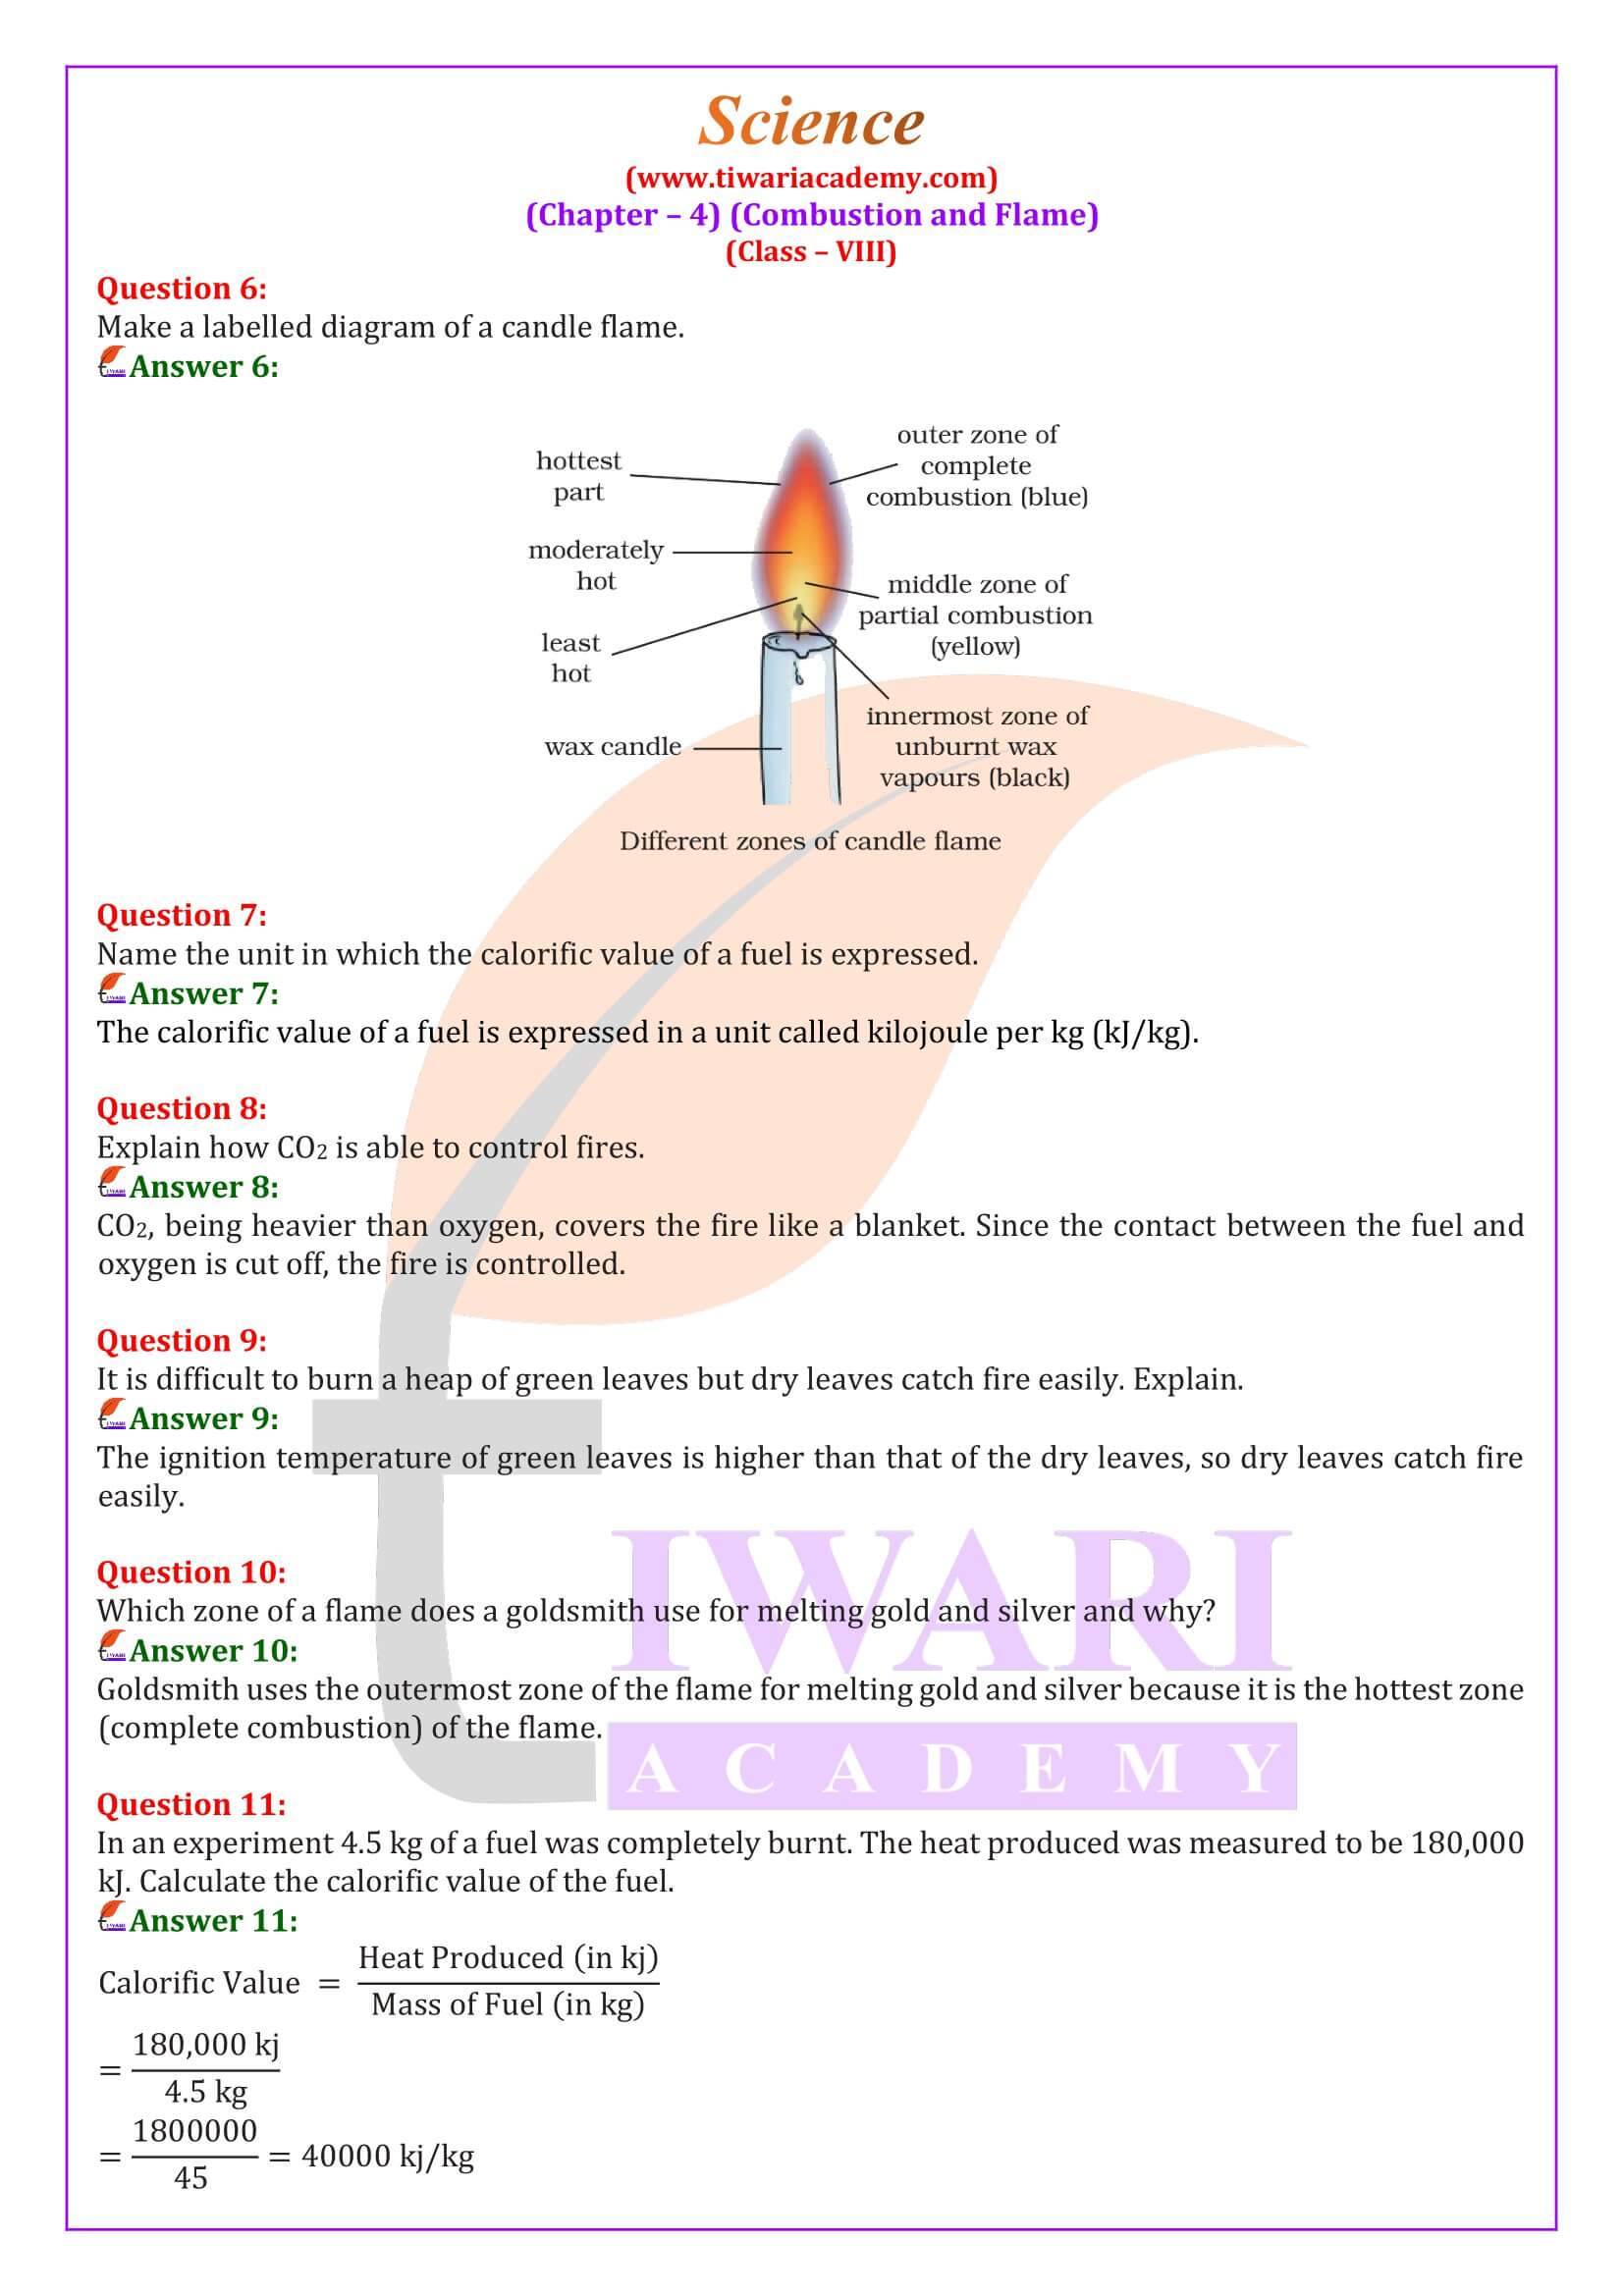 NCERT Solutions for Class 8 Science Chapter 4 Question Answers